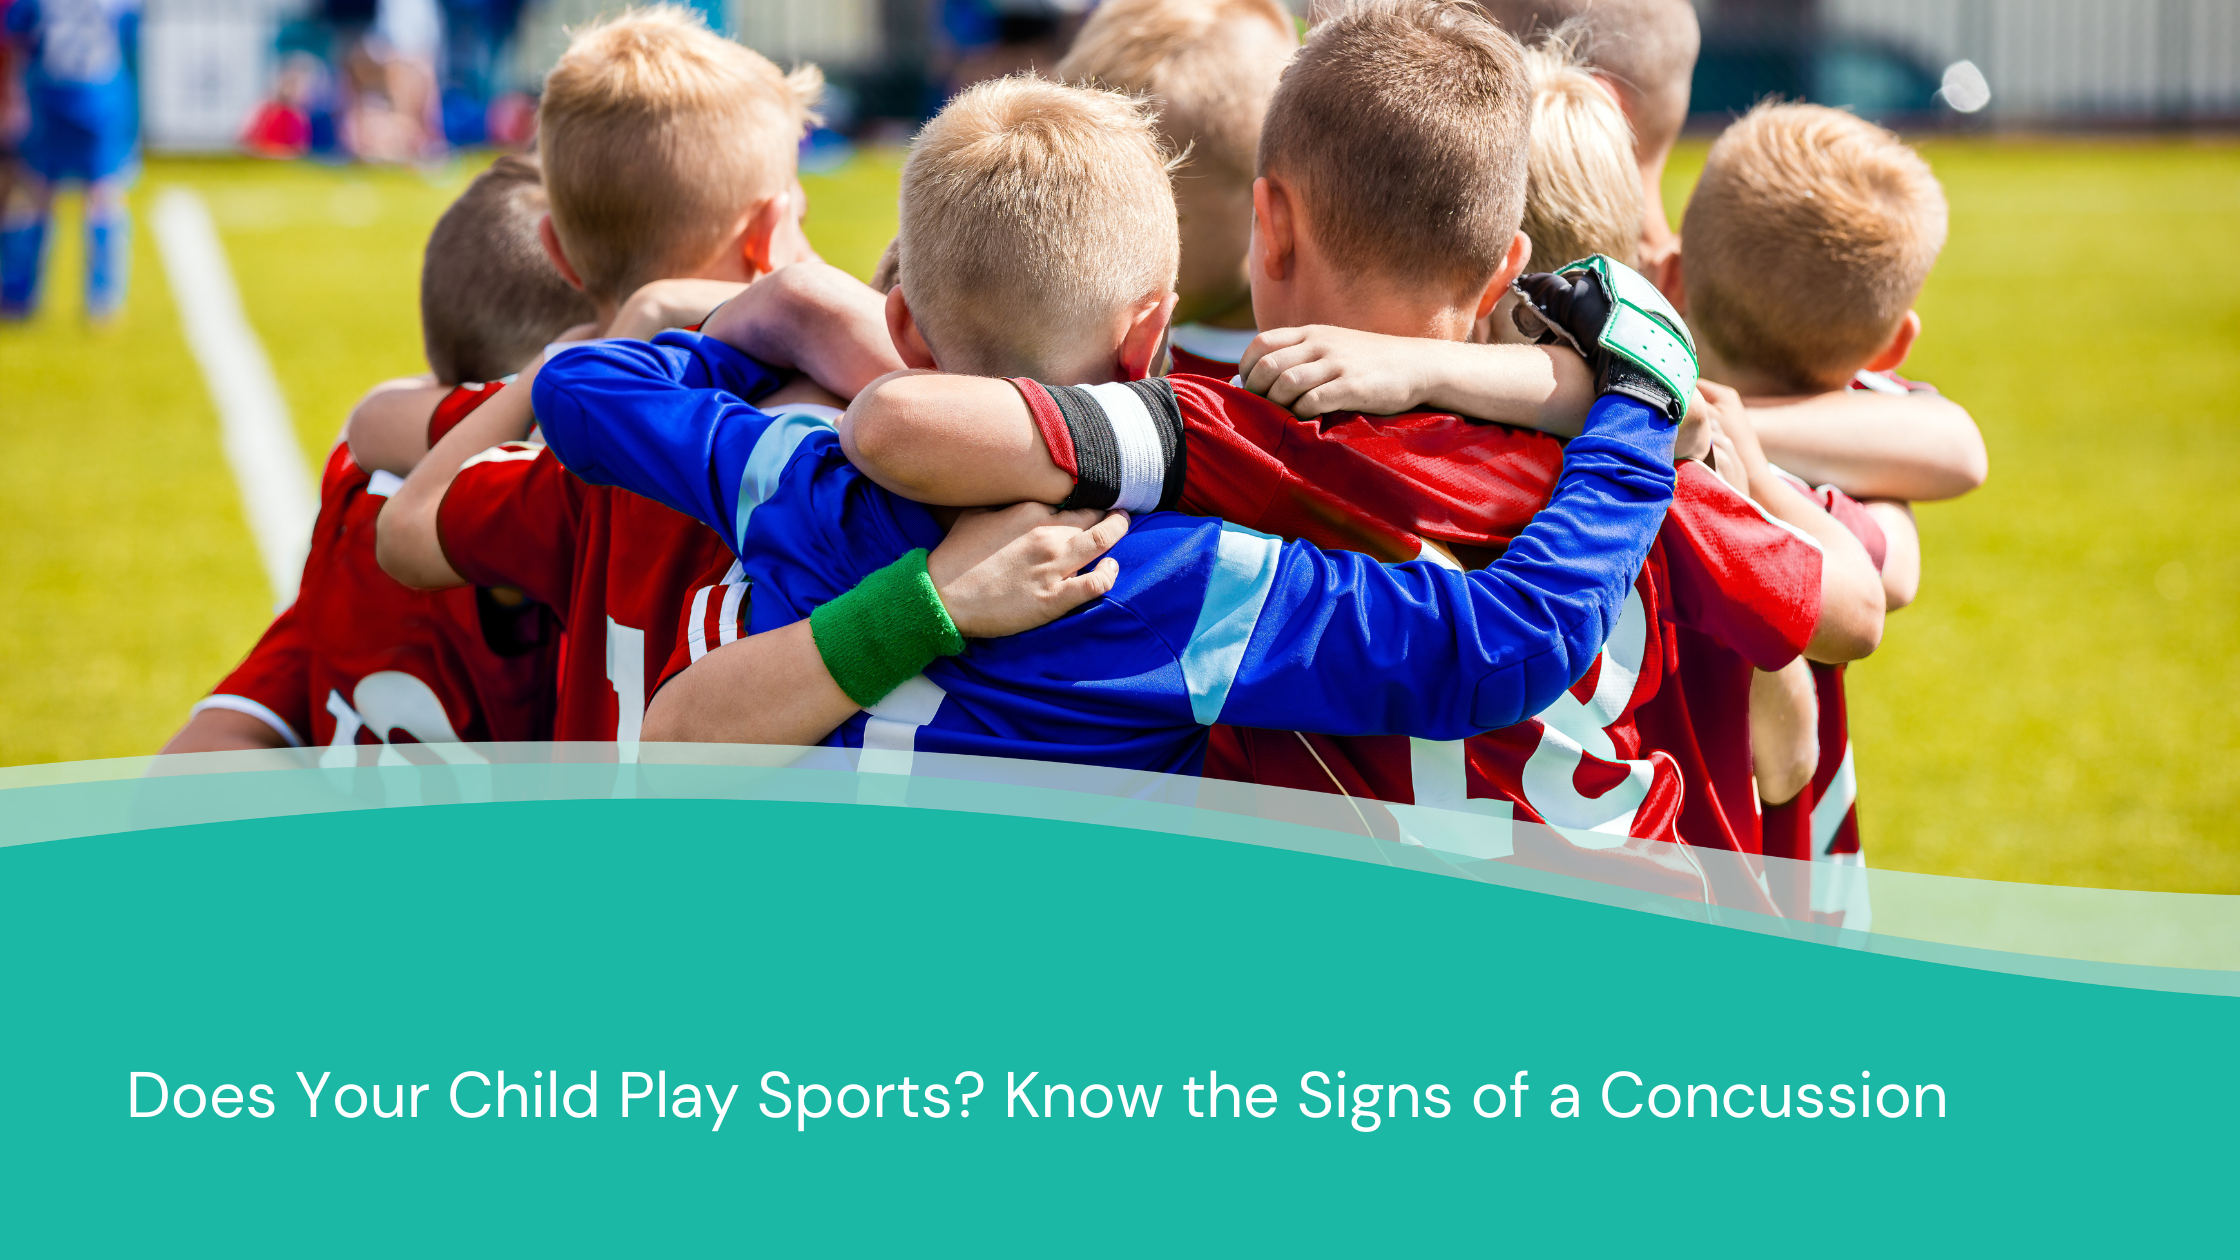 Does Your Child Play Sports? Know the Signs of a Concussion